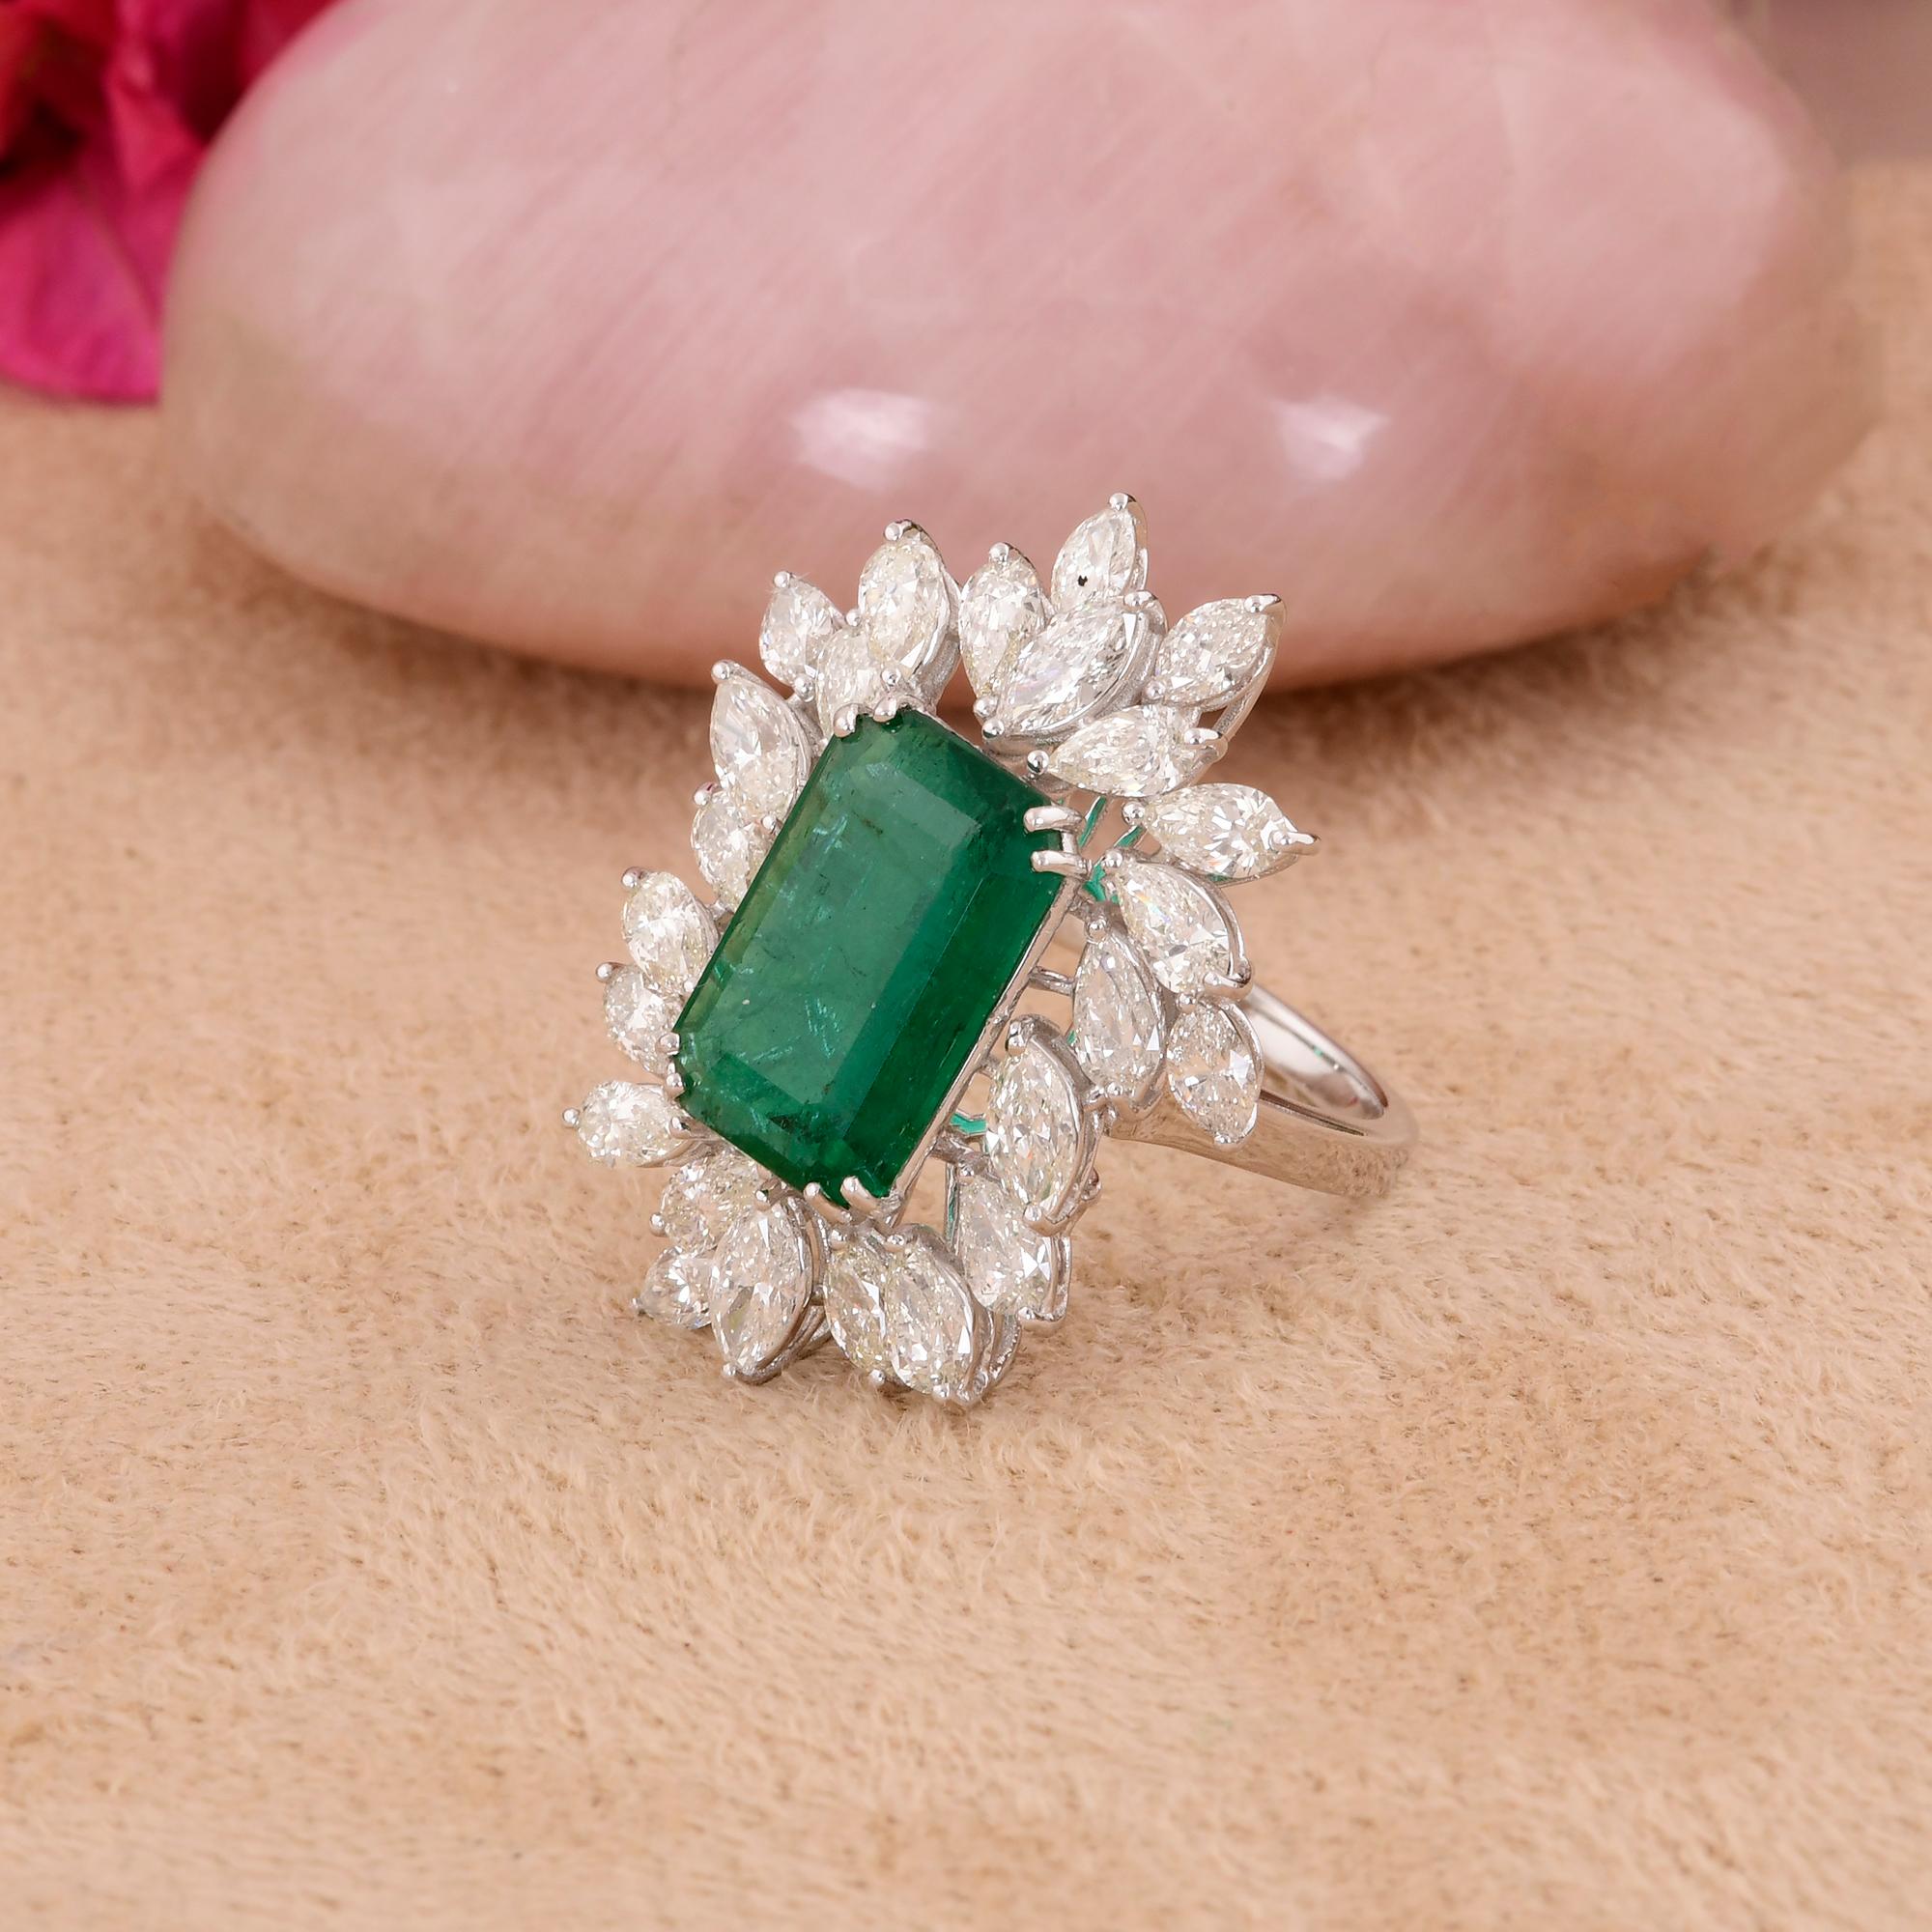 Women's Real Zambian Emerald Gemstone Cocktail Ring Marquise Diamond 14 Karat White Gold For Sale